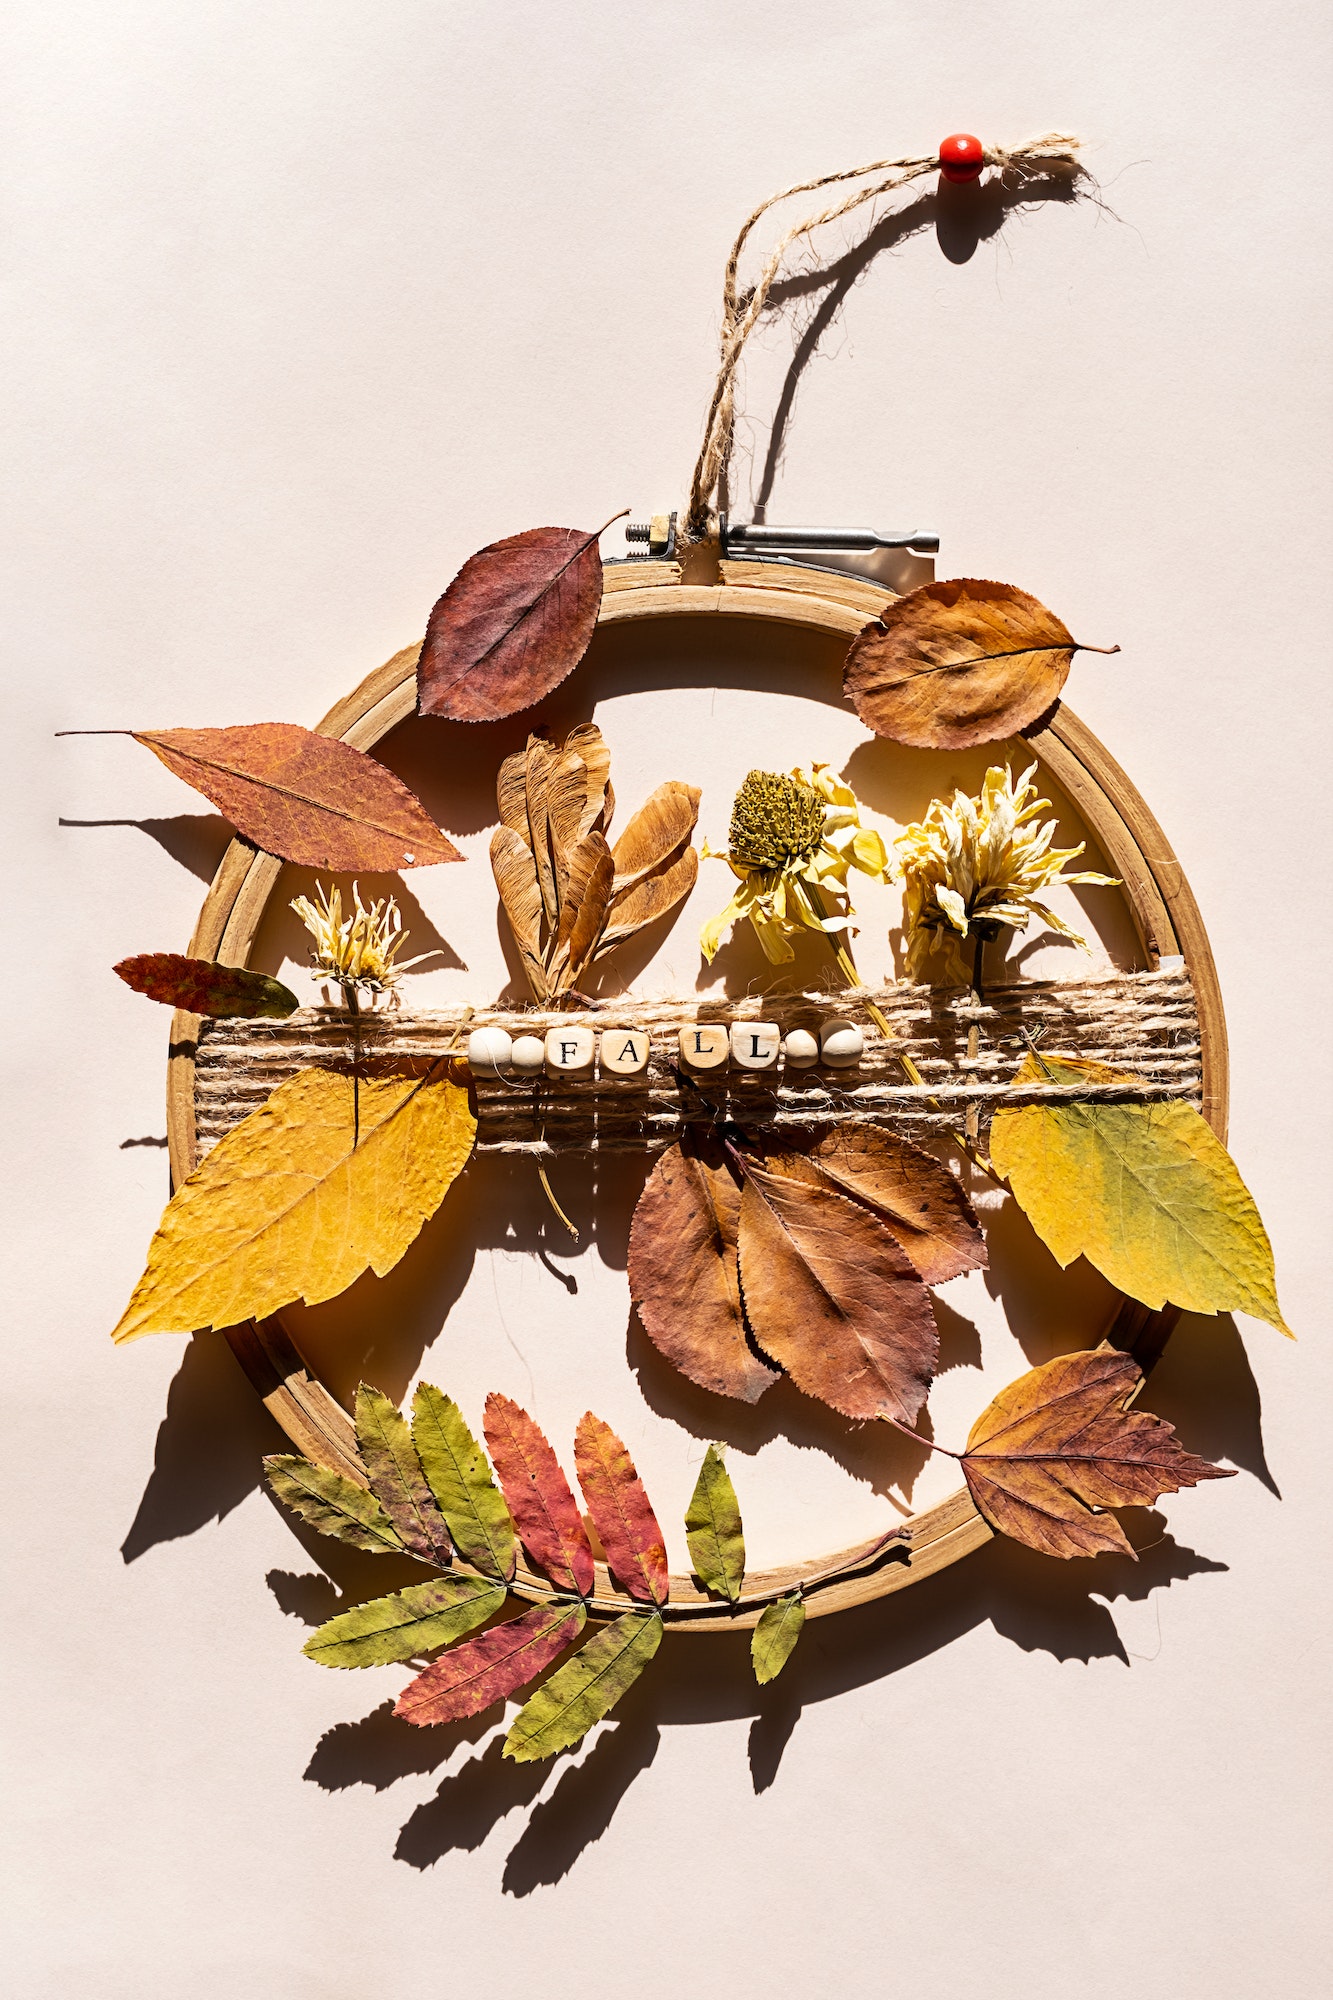 DIY Door Wreath from Autumn Colourful Leaves and Flowers. Fall Home Decor.